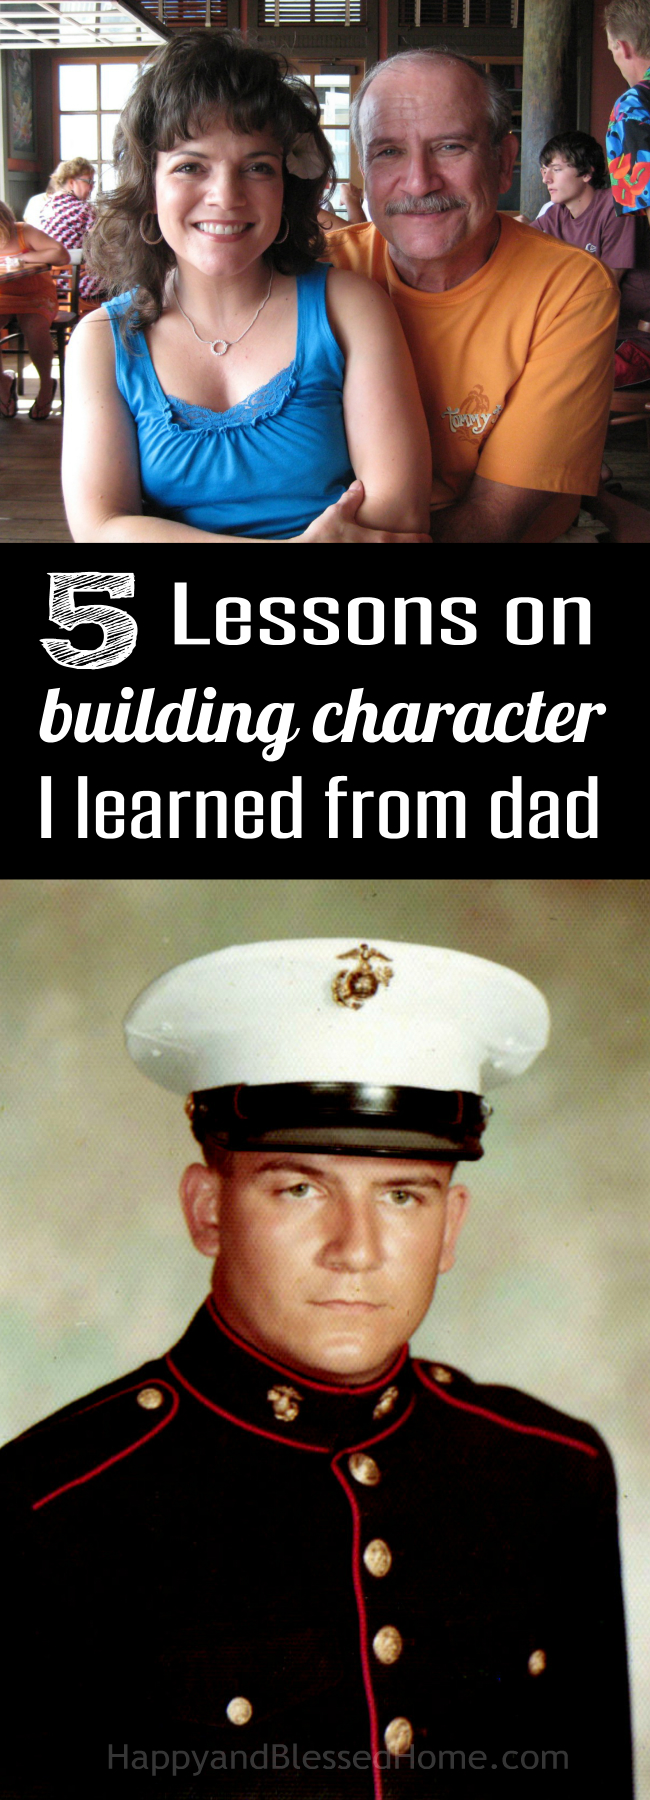 Great parenting tips - 5 Lessons on Building Character I Learned from Dad photo copyright 2015 HappyandBlessedHome.com